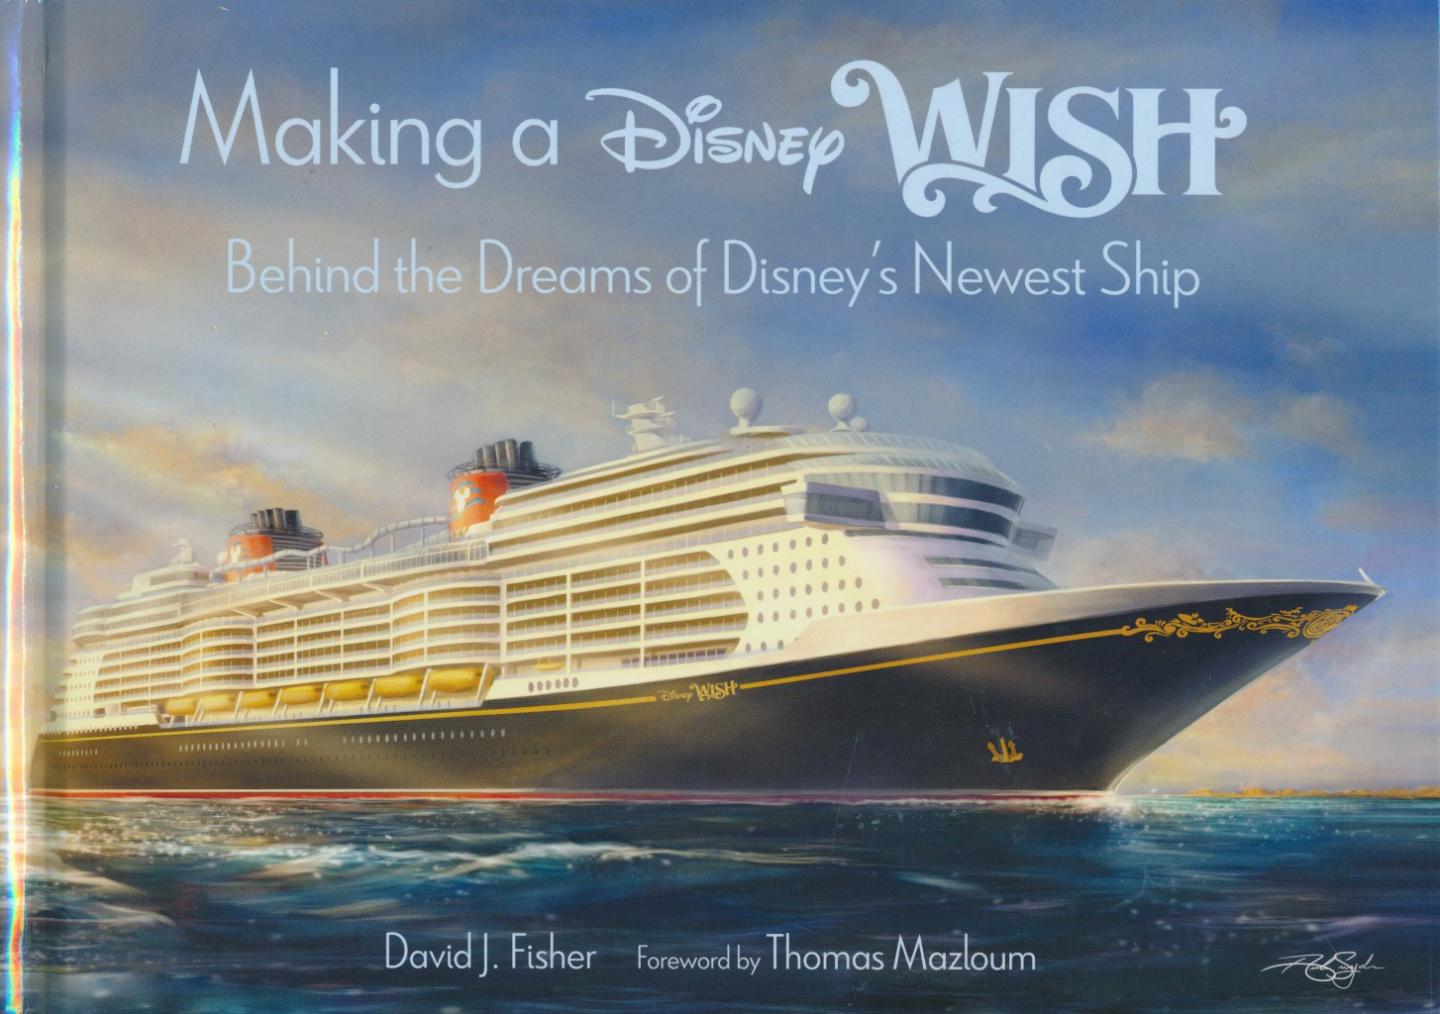 Fisher, David J. - Making a Disney Wish. Behind the dreams of Disney's newest ship